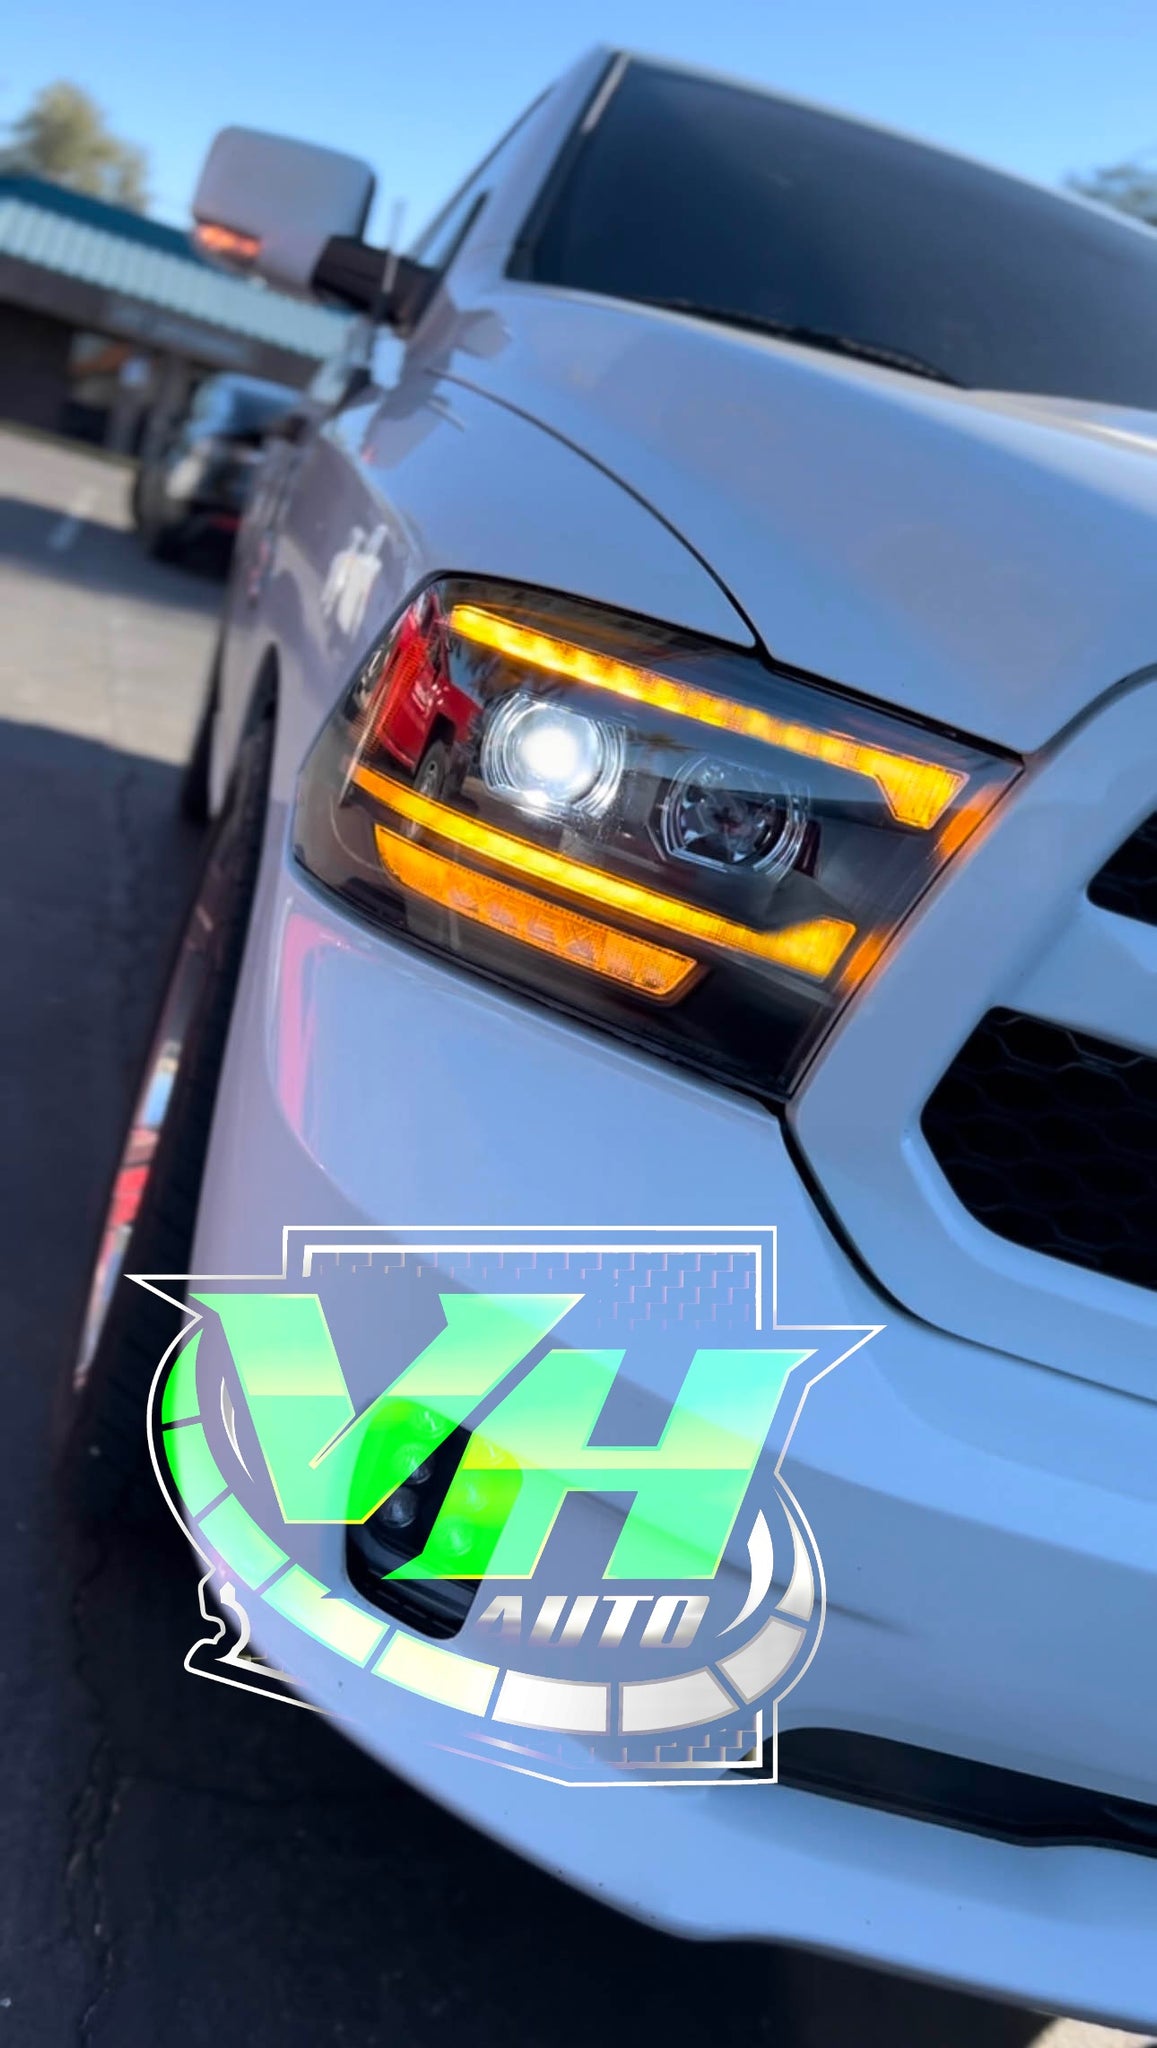 13-18 Dodge Ram 1500 “Big Horn” Style Grill – VH Auto